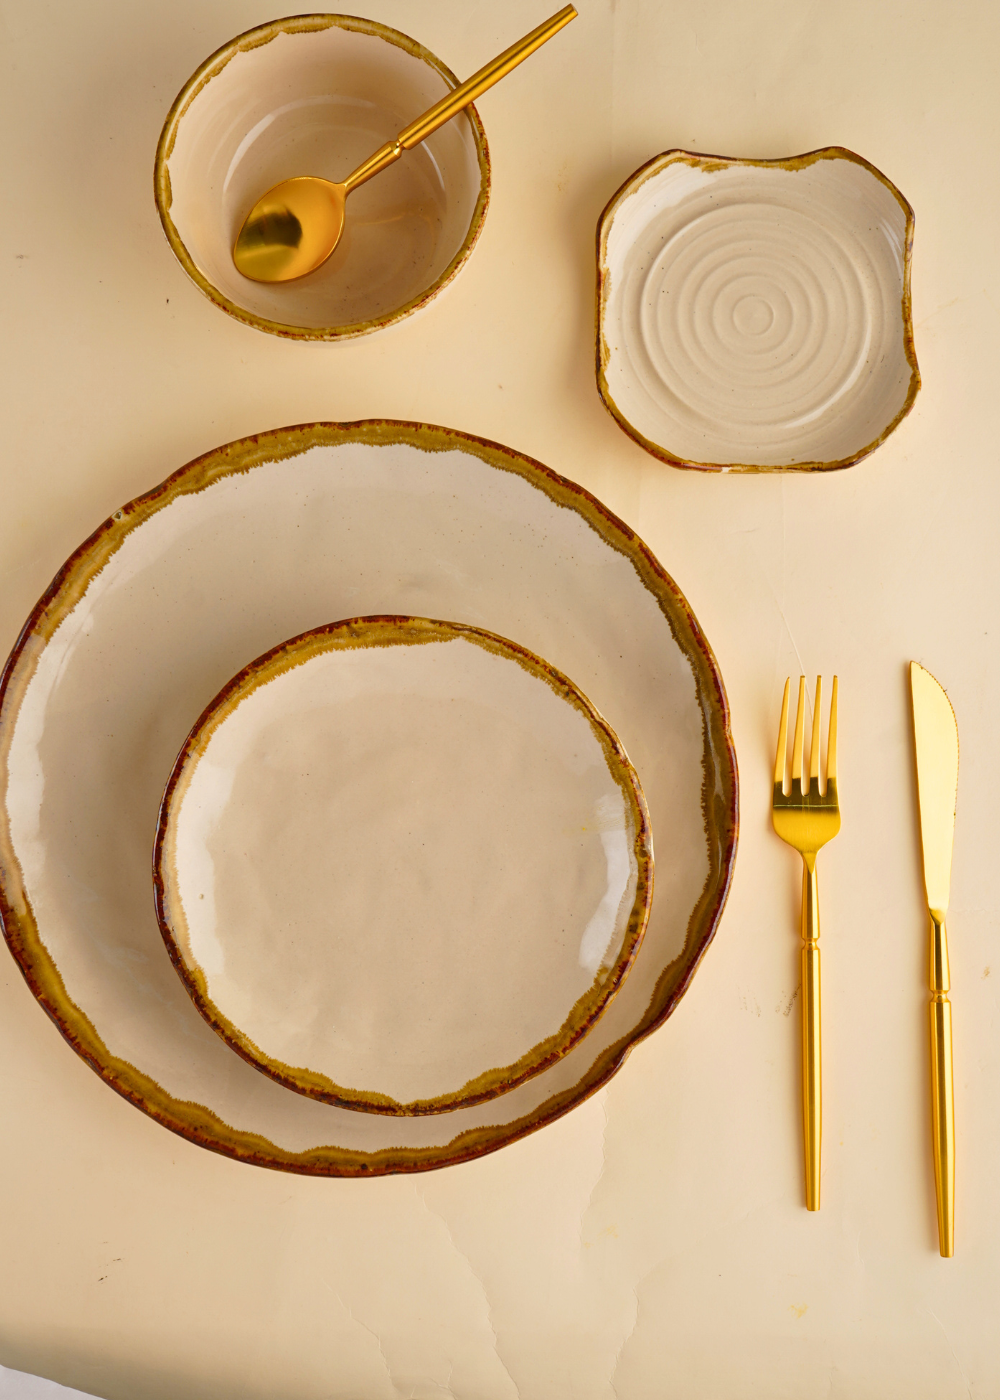 ivory stoneware dinner set with golden cutlery